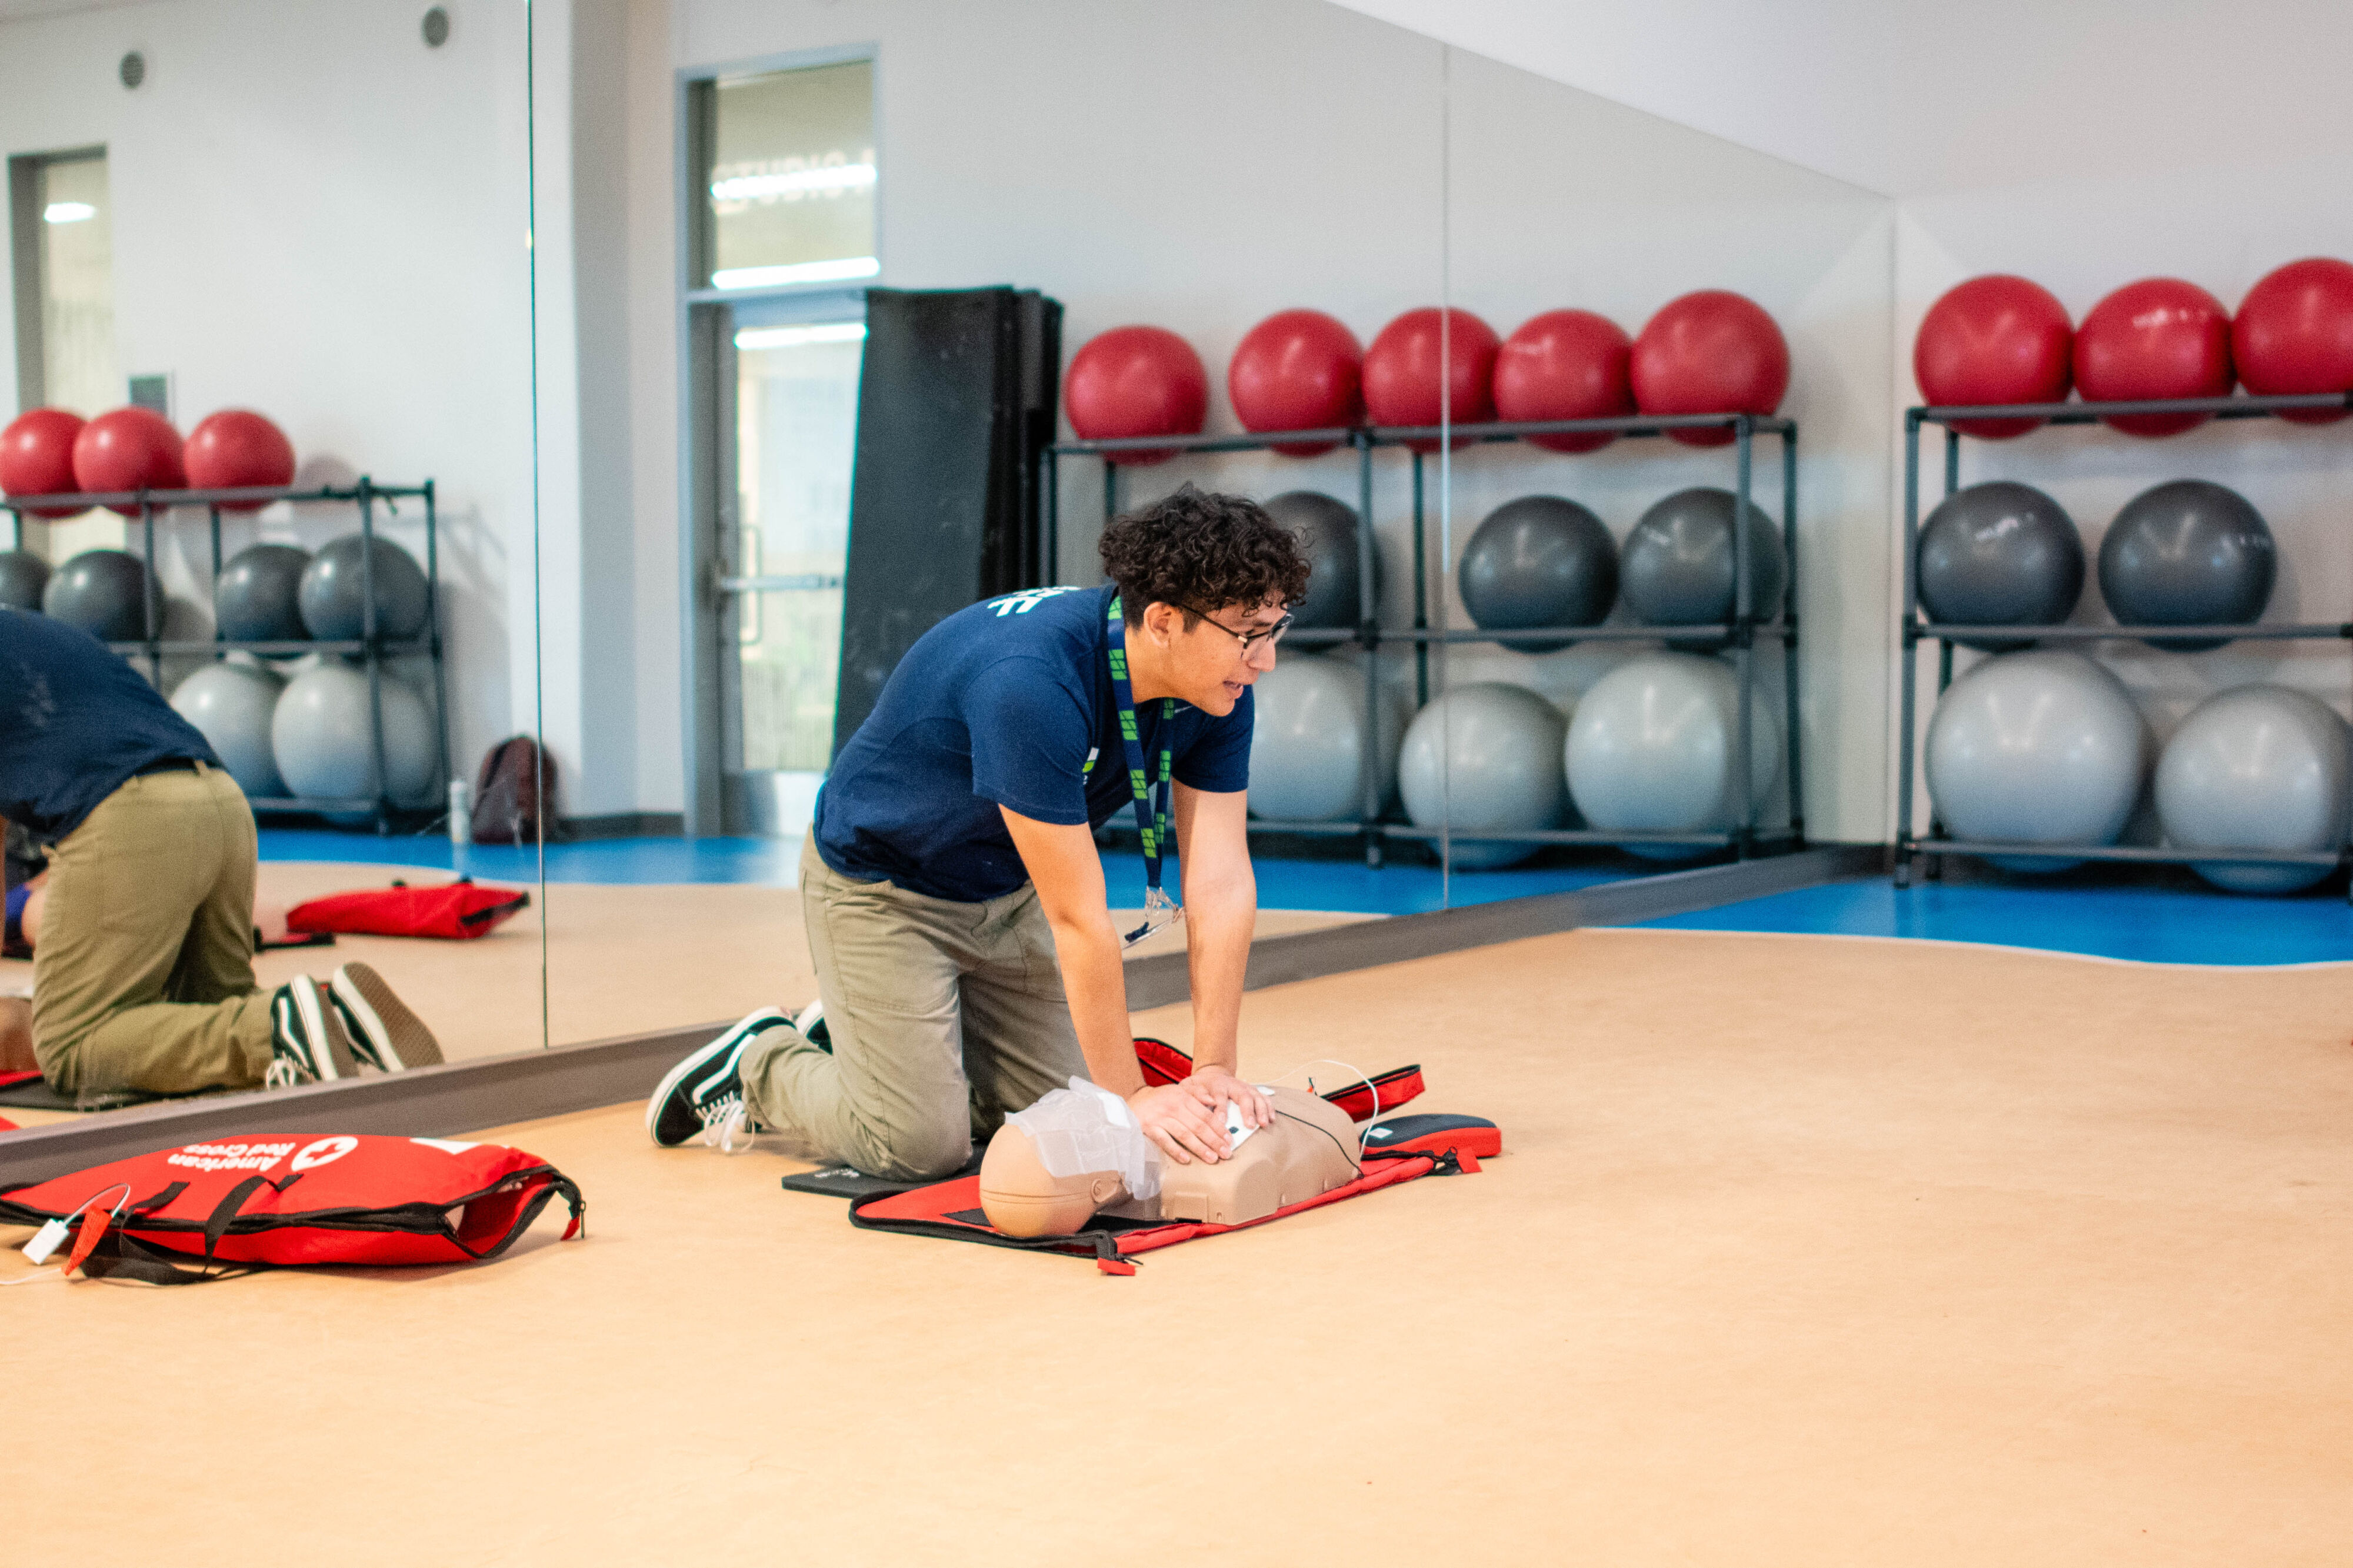  An individual is kneeling to perform CPR on a training dummy in a gym